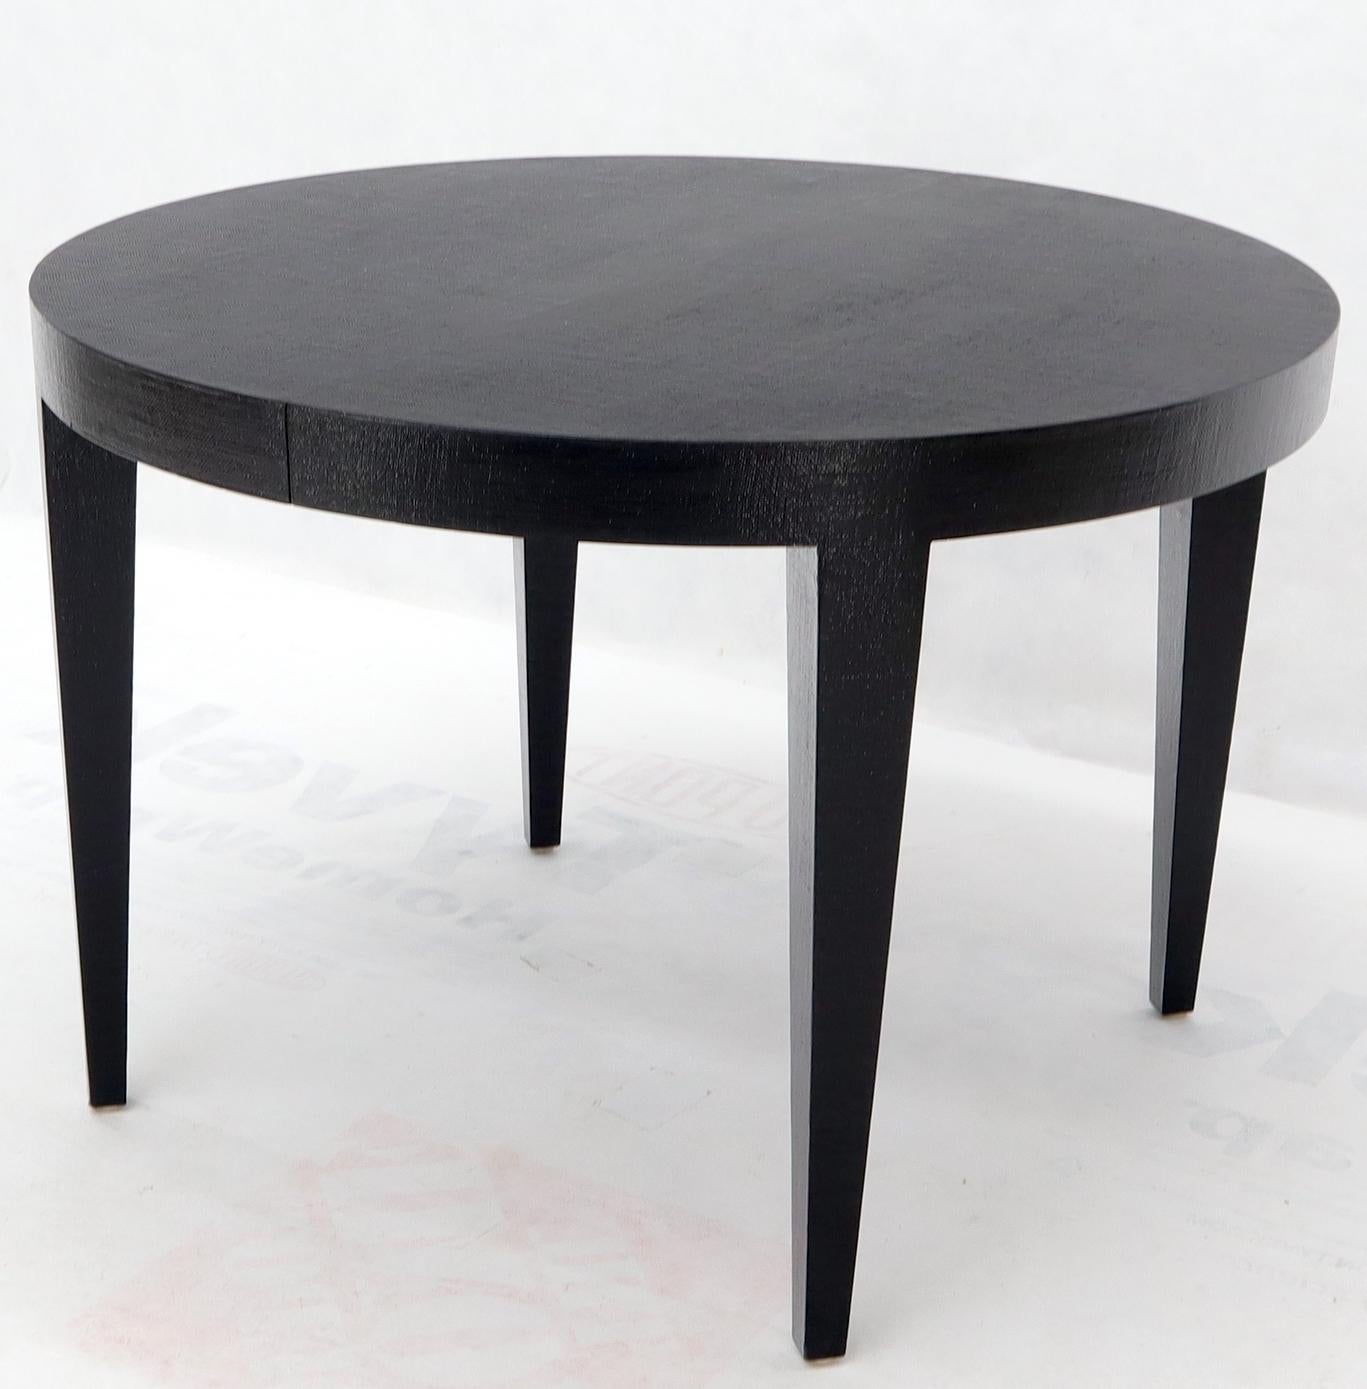 American Raffia Cloth Covered Black Lacquer Square Tapered Legs Dining Conference Table